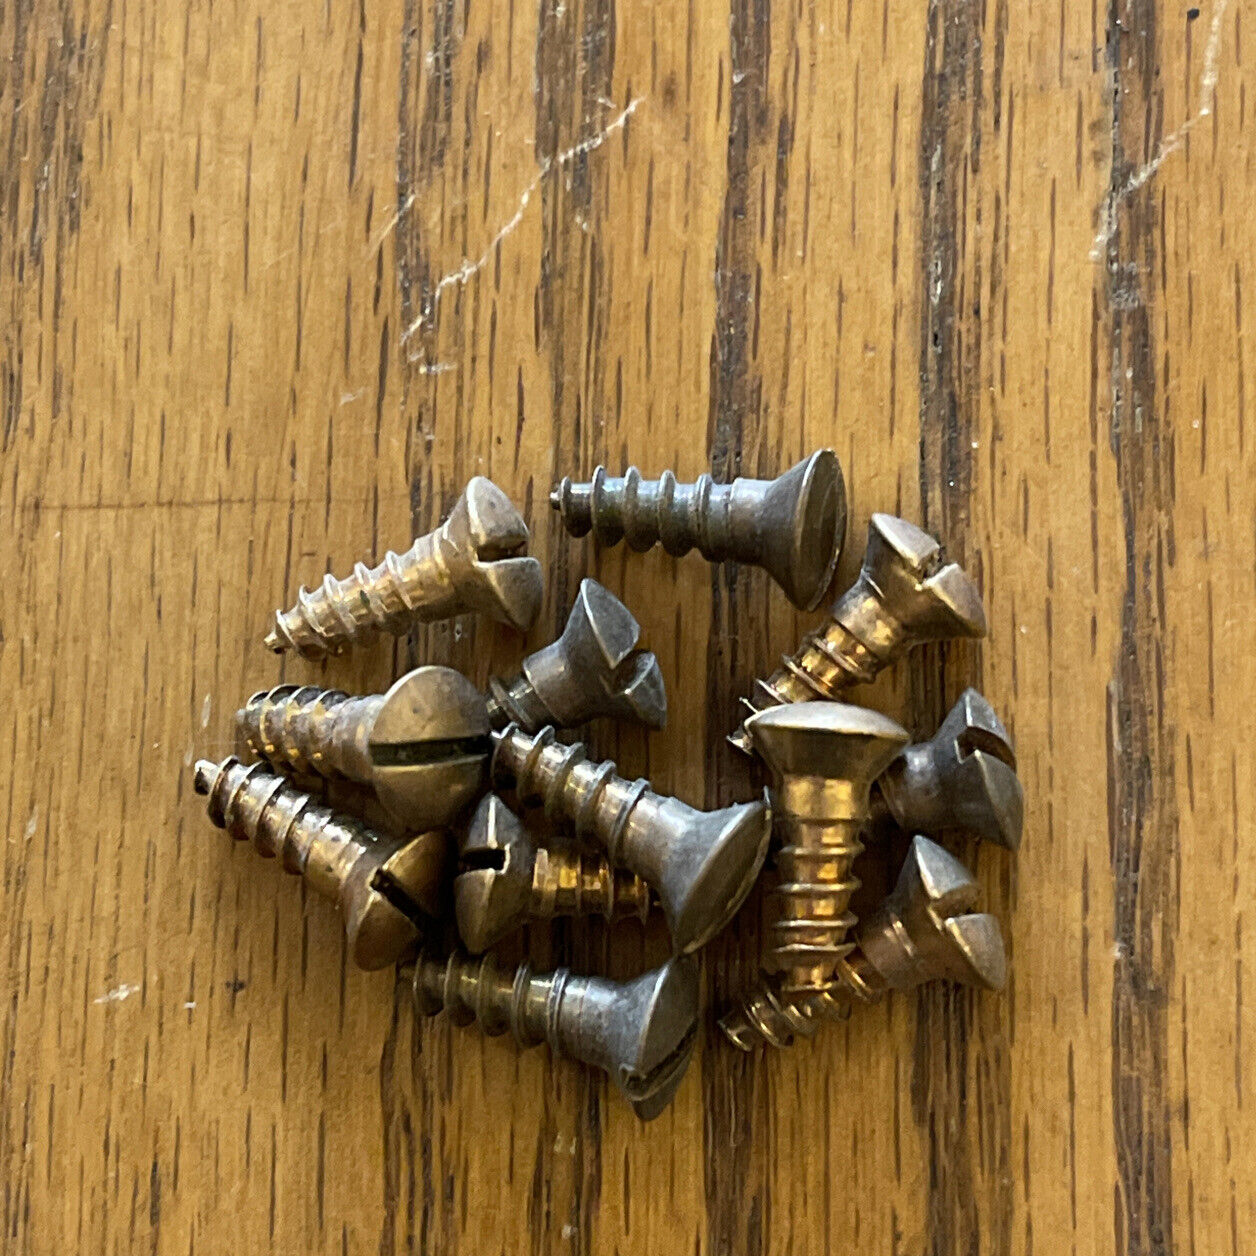 8 X 1/2 Wood Screws Slotted Oval Head Silcon Bronze